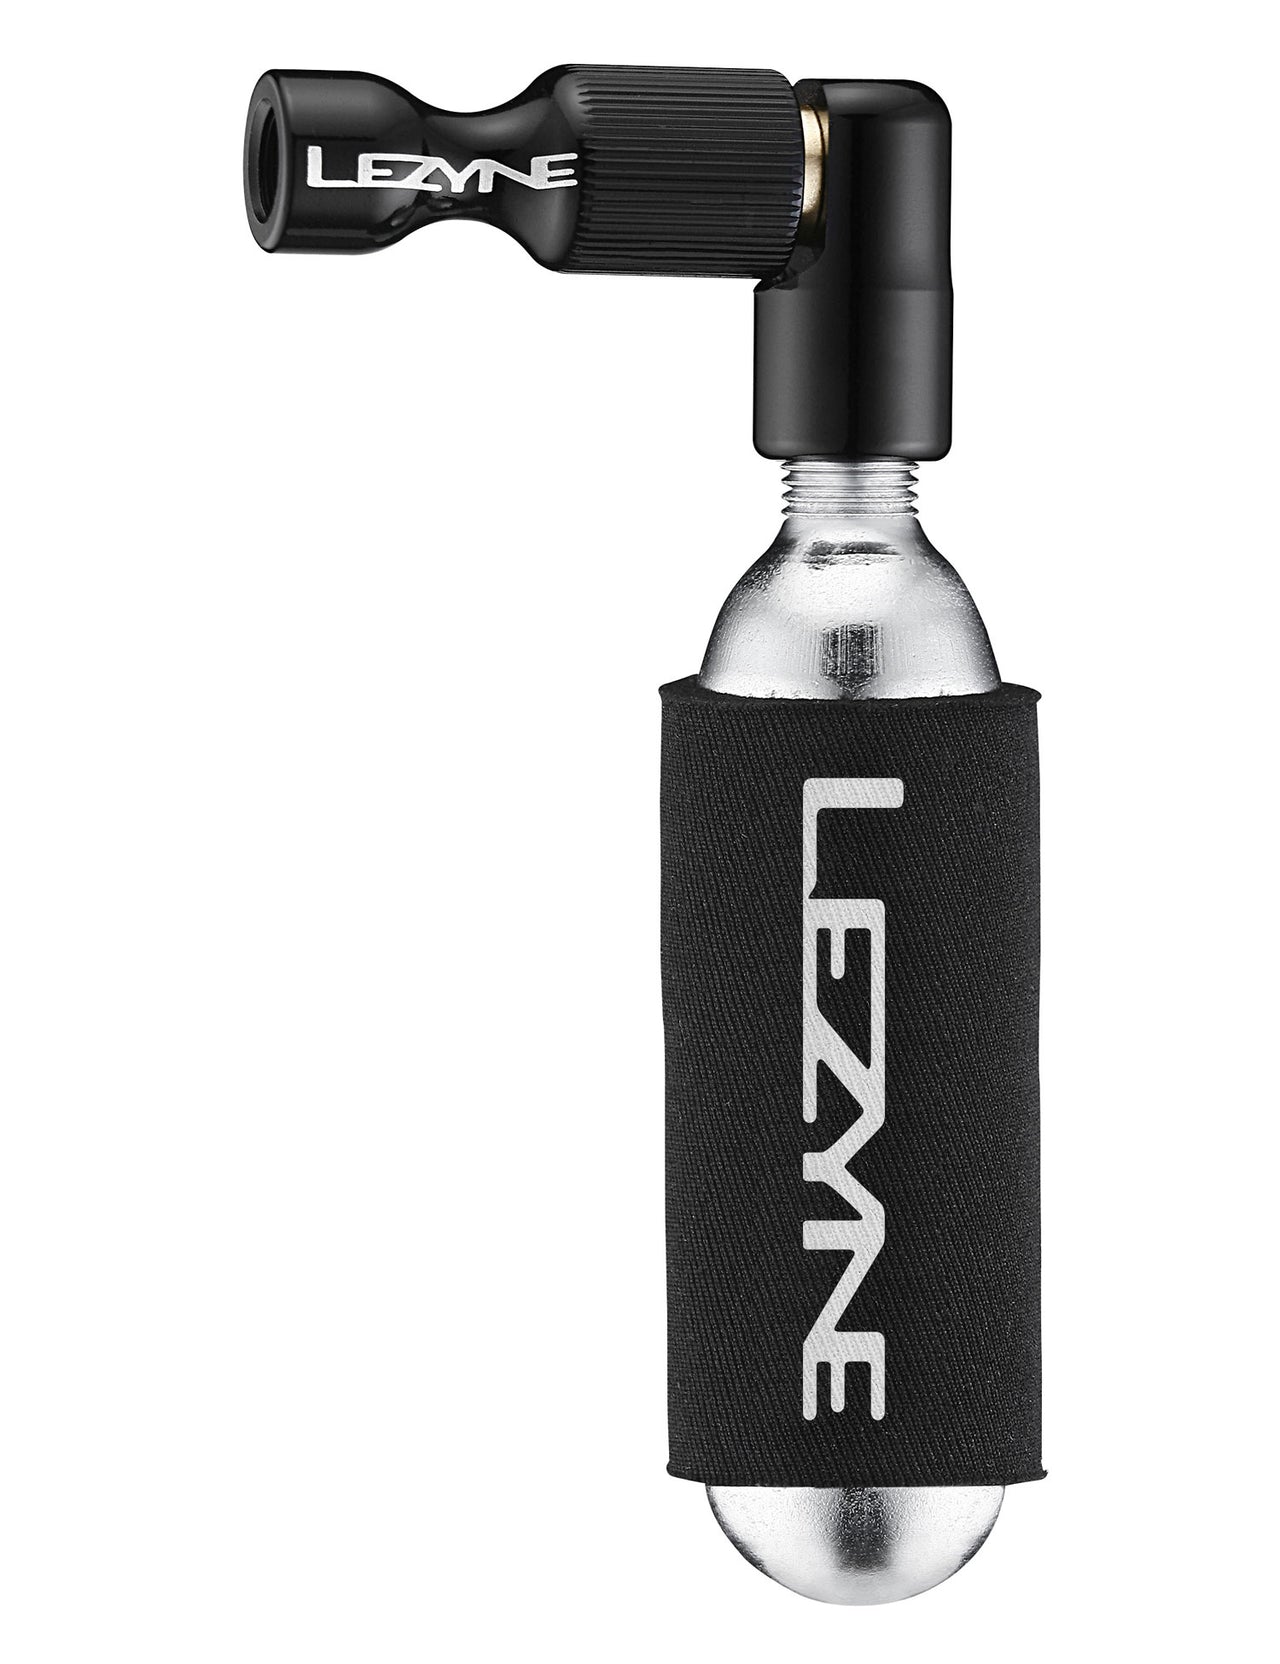 Lezyne Co2 Trigger Drive Black Includes 16gm Co2 Canister And Anti Freeze Jacket